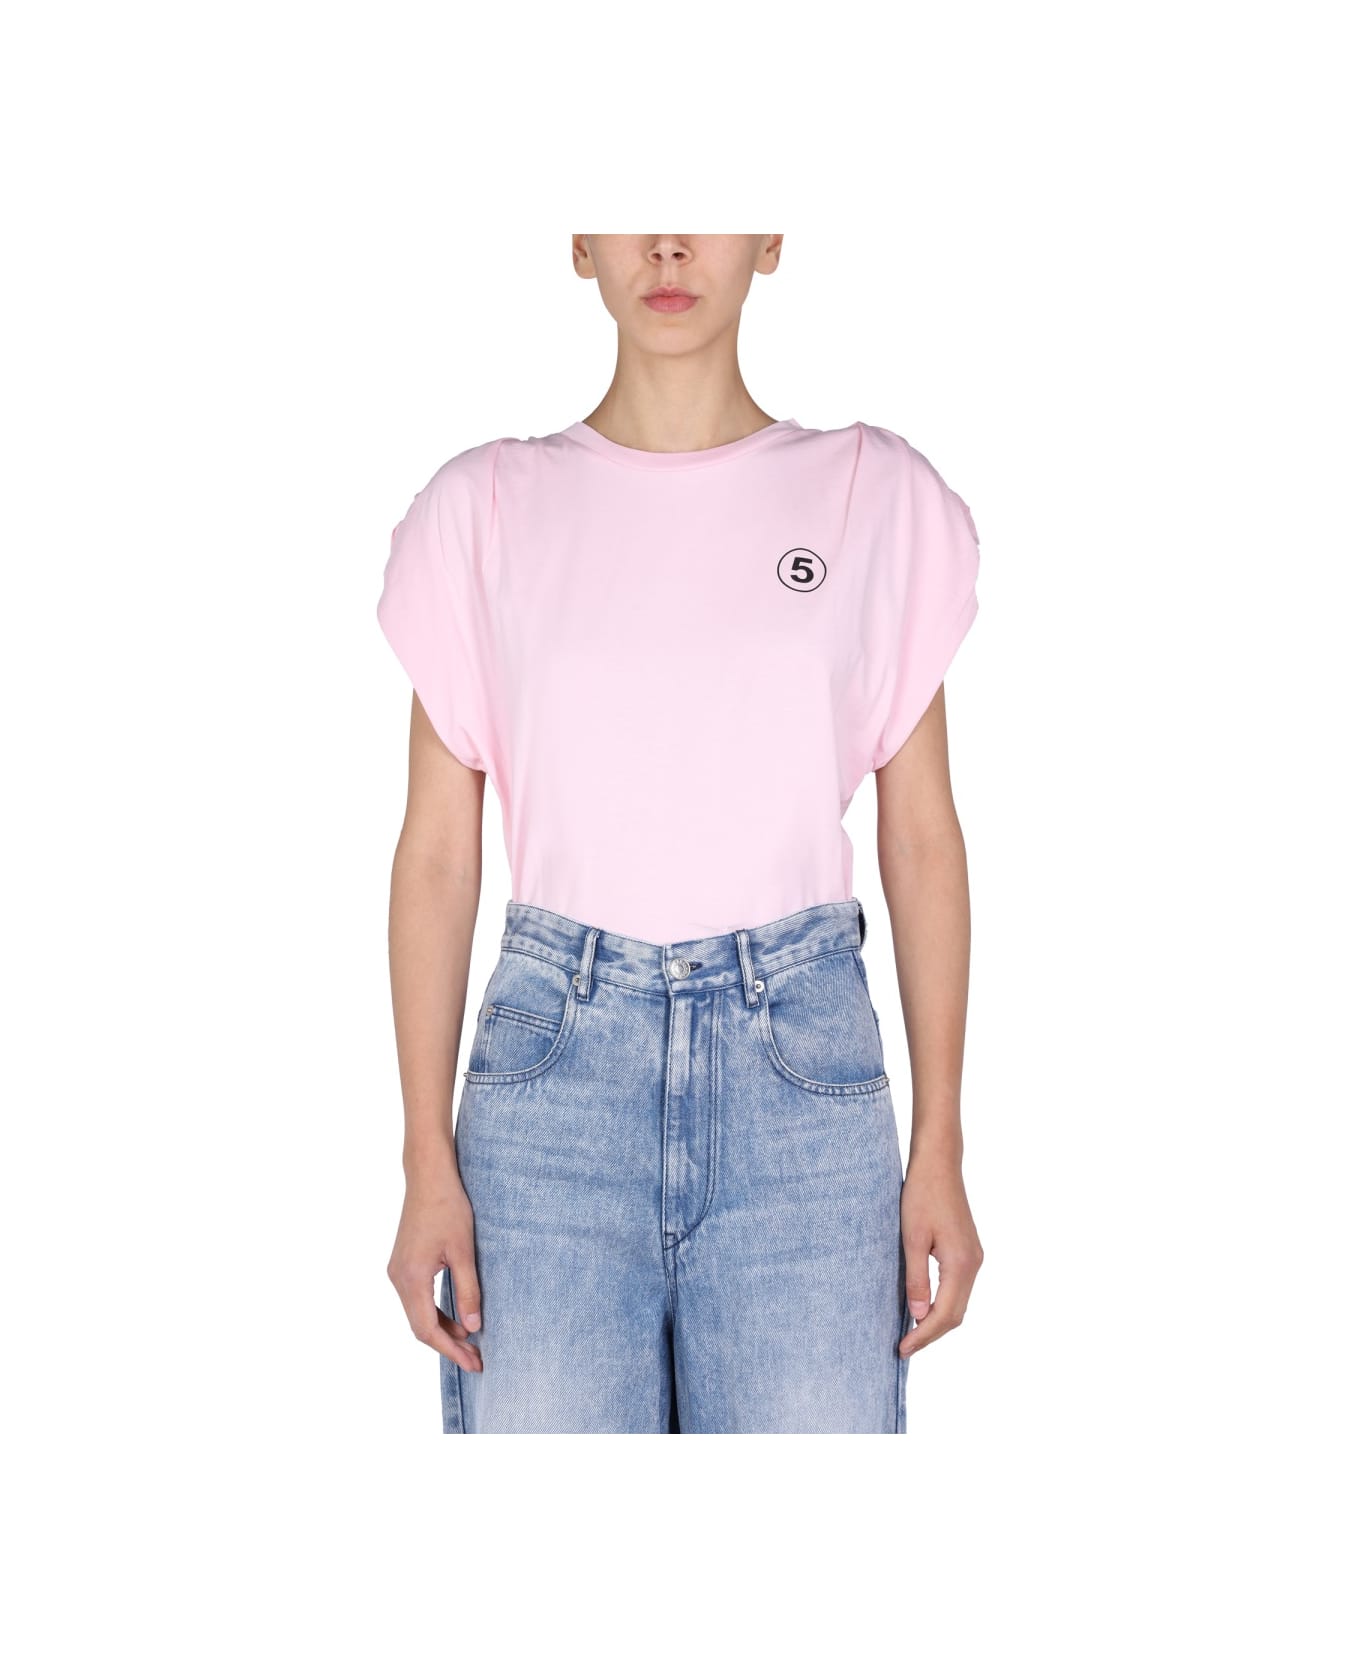 Department Five "hollywood" T-shirt - PINK Tシャツ